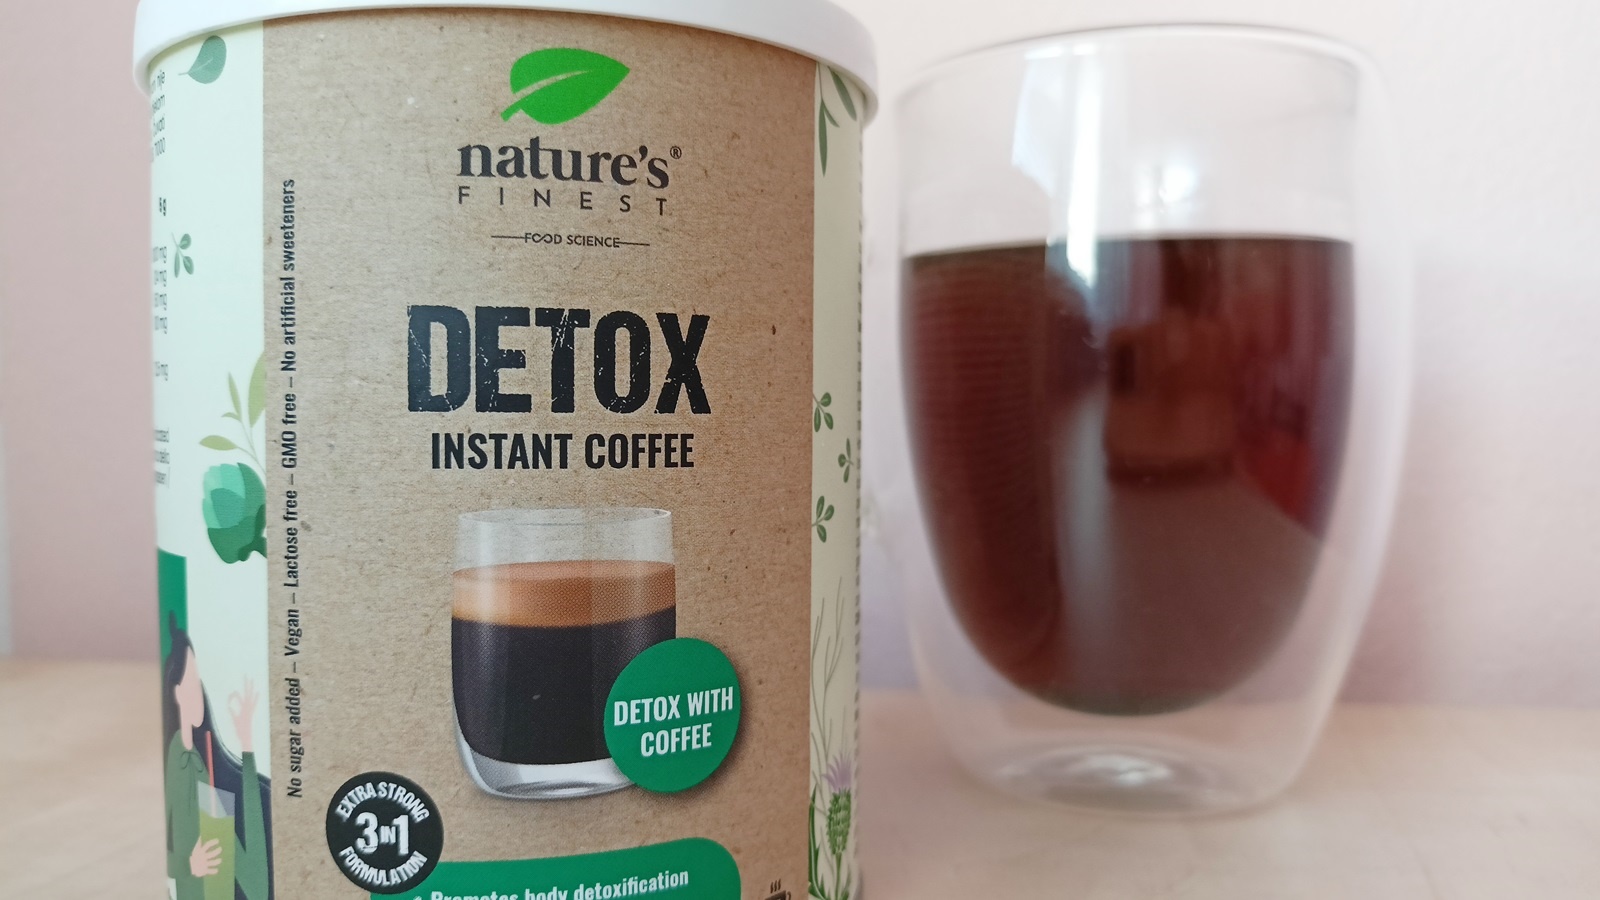 Review: Detox Instant Coffee by Nature’s Finest